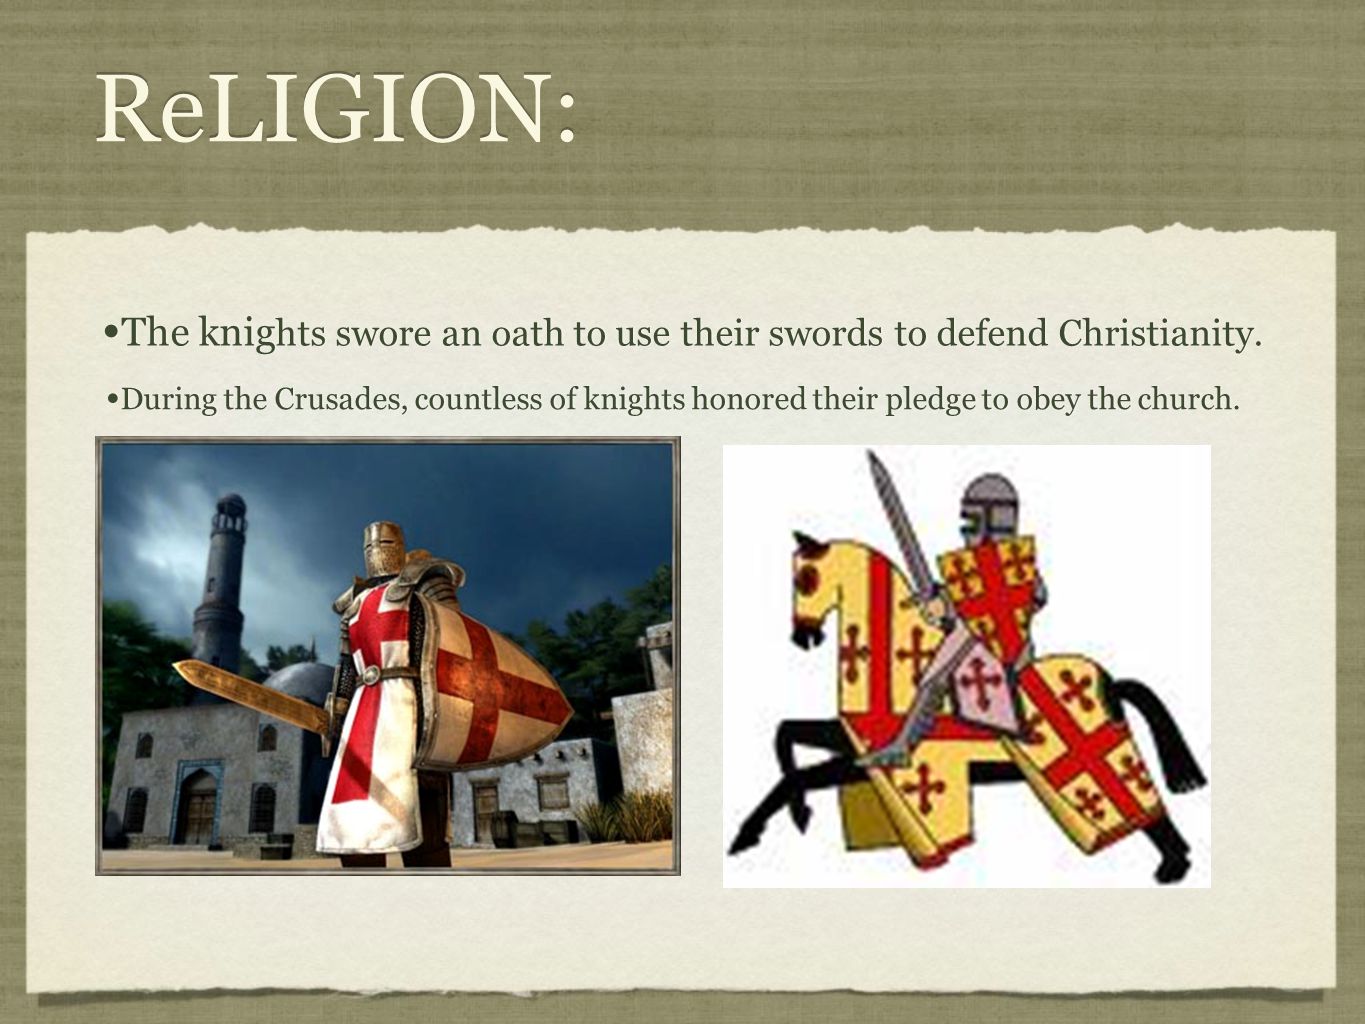 ReLIGION: The knig hts swore an oath to use their swords to defend Christianity.